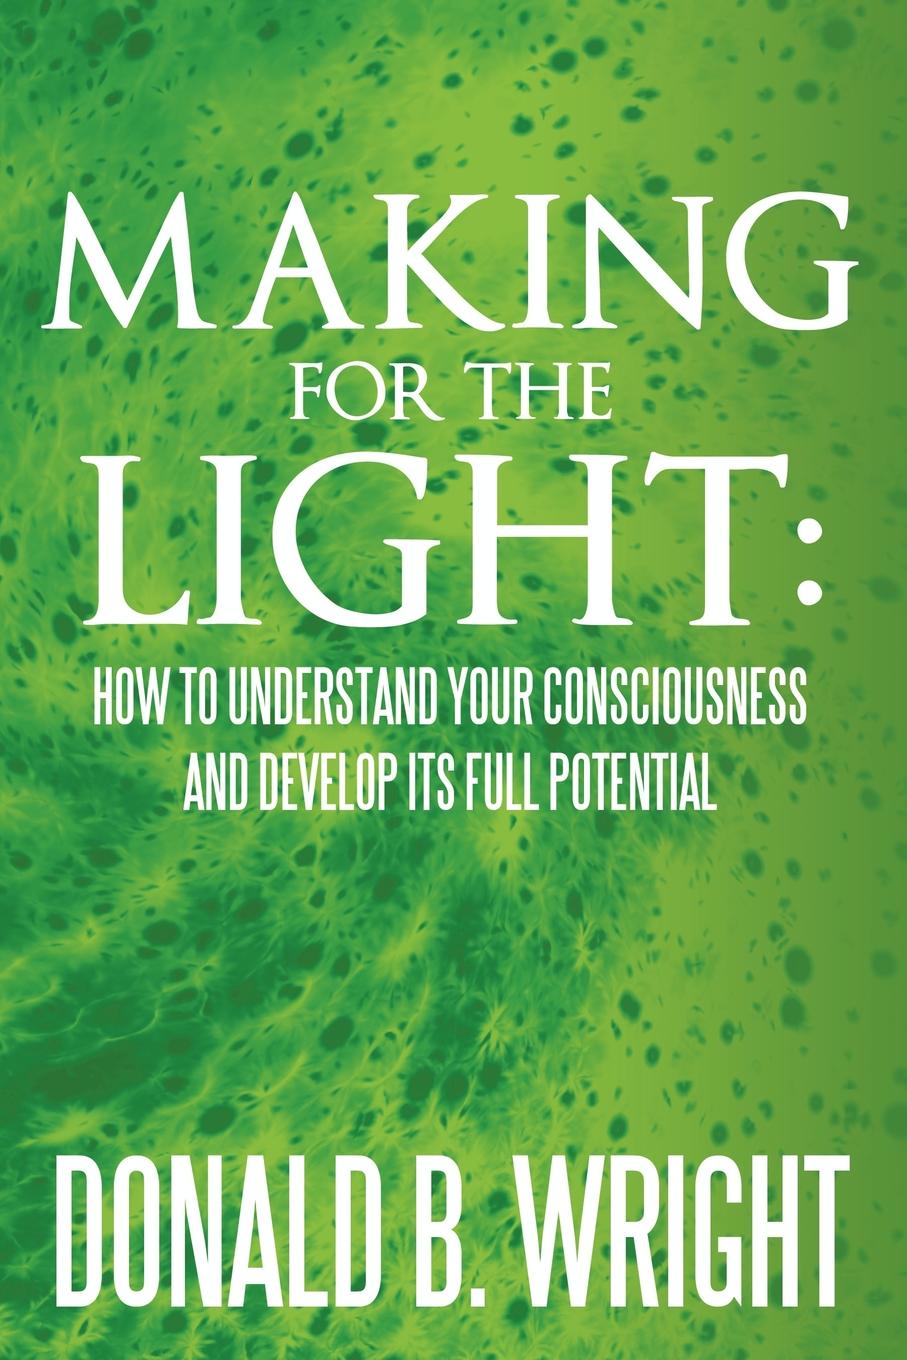 Making for the Light. How to Understand Your Consciousness and Develop Its Full Potential: How to Understand Your Consciousness and Develop